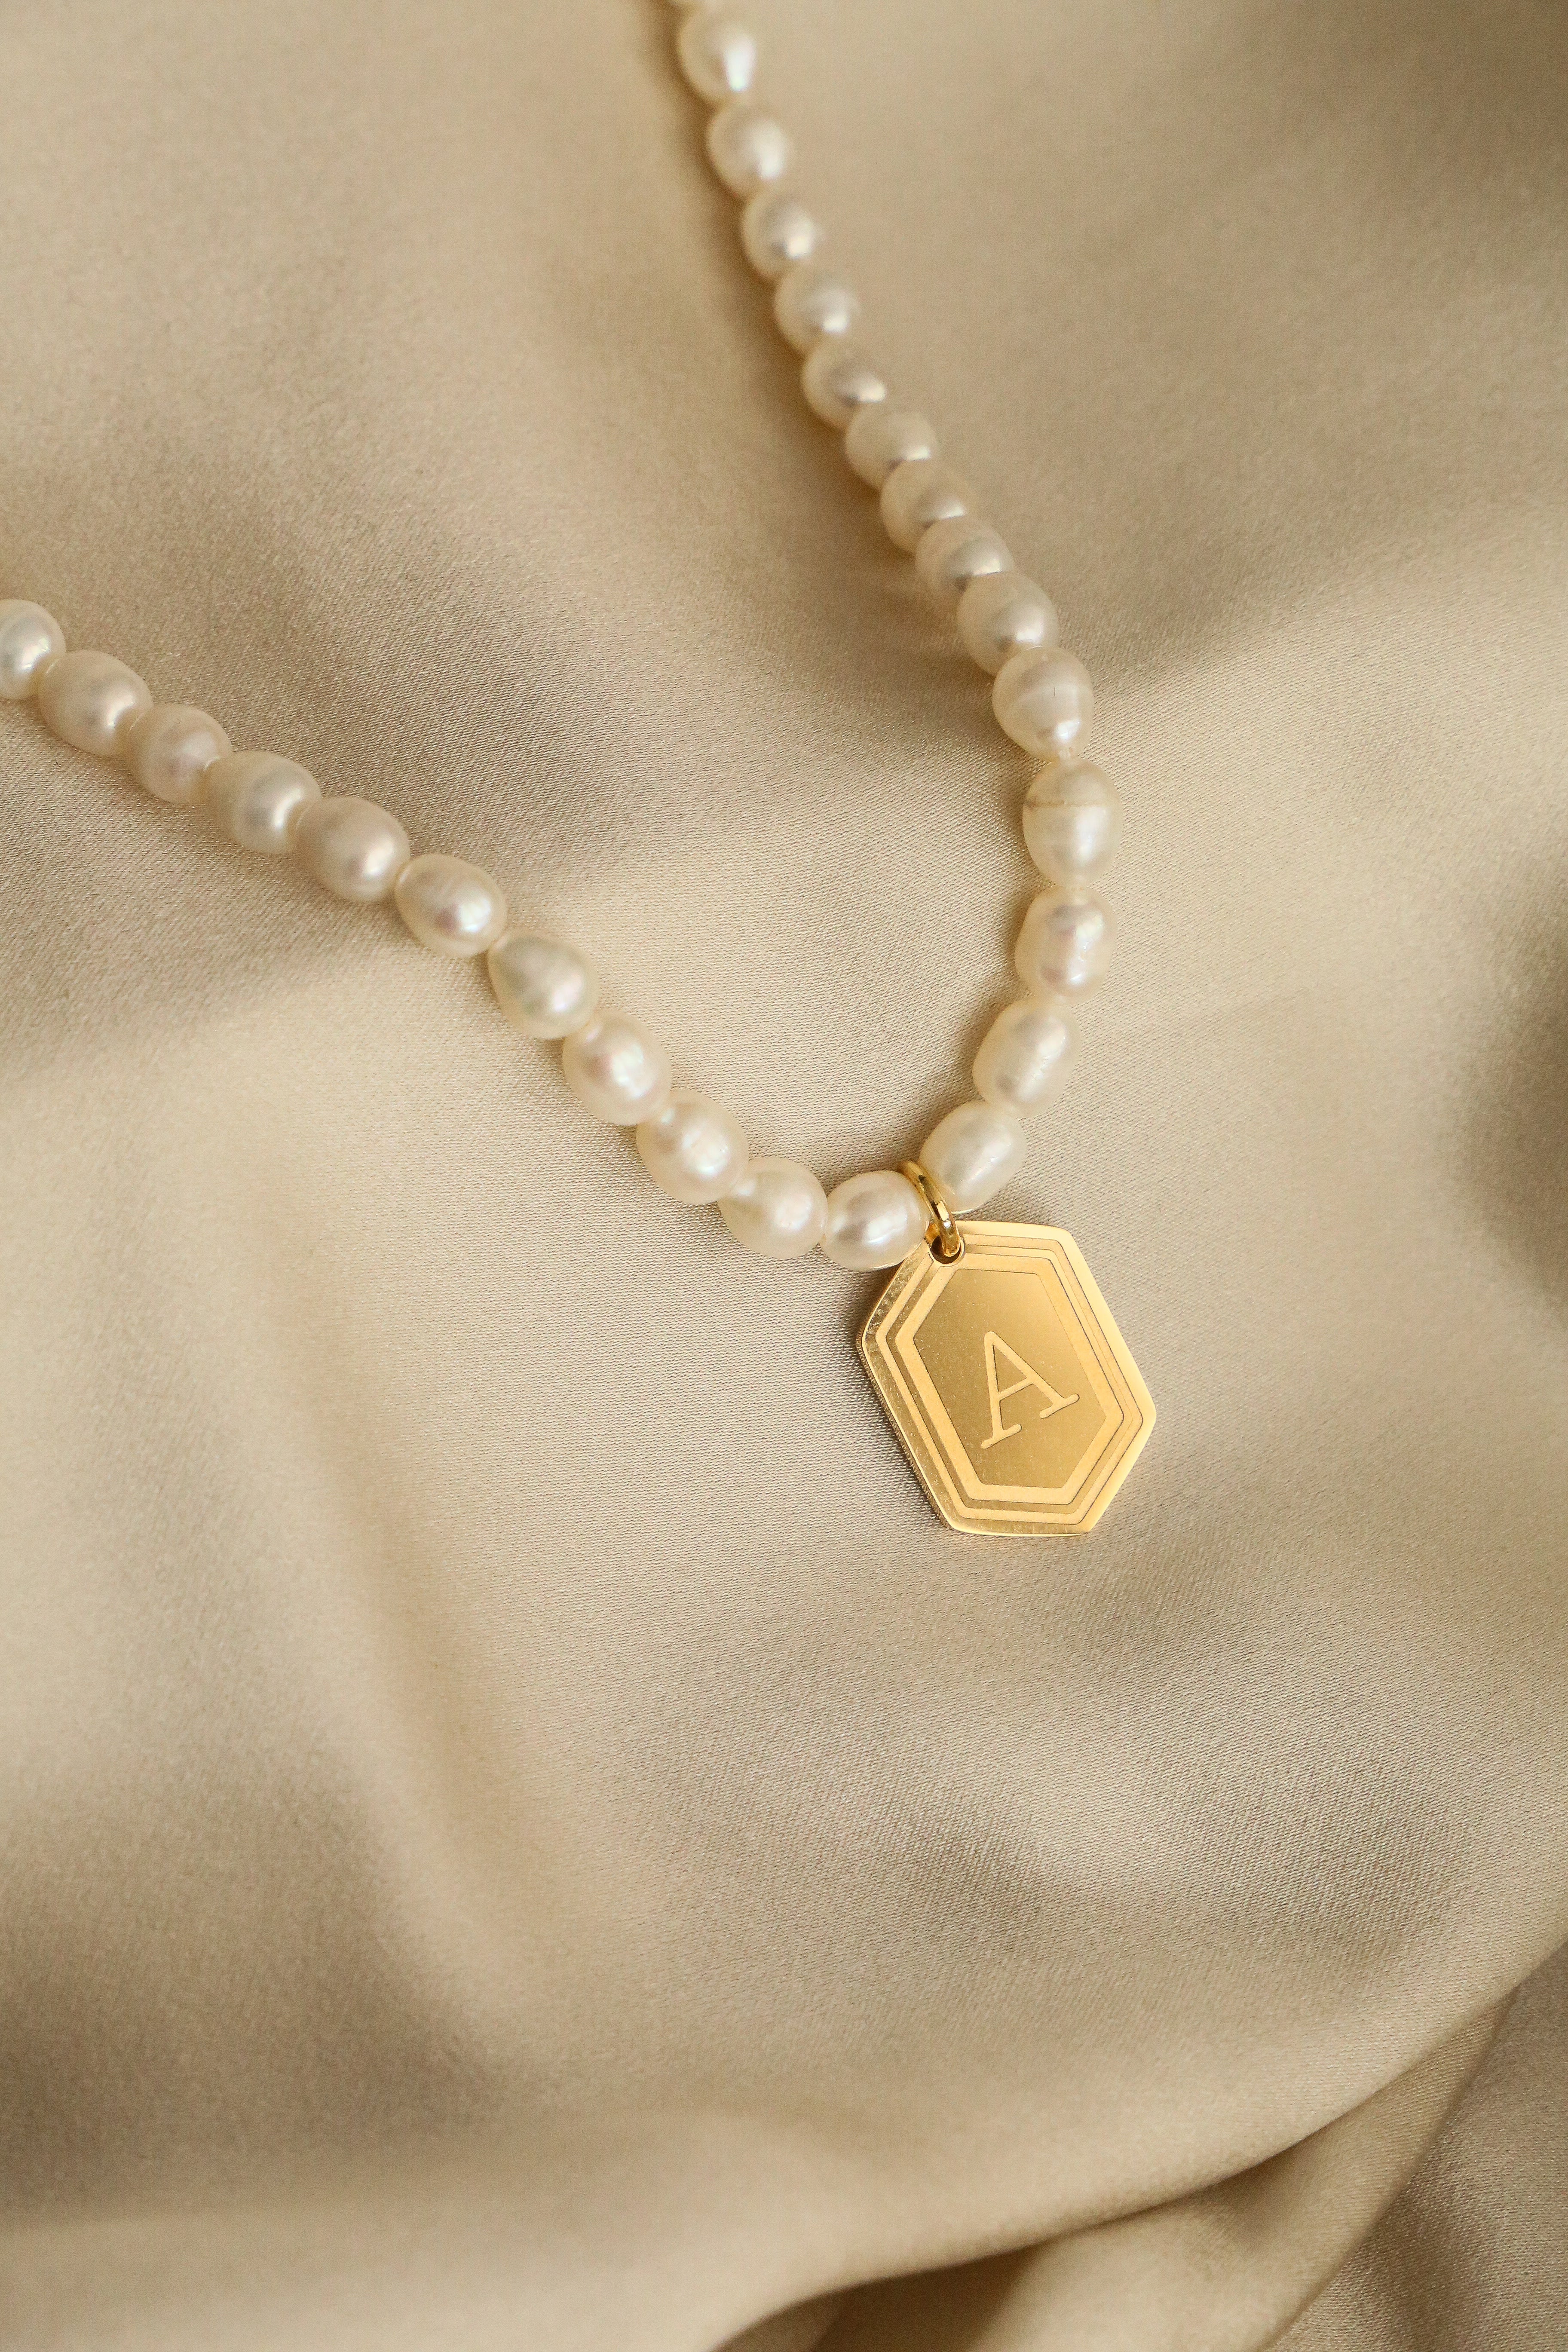 Petra Initial Necklace - Boutique Minimaliste has waterproof, durable, elegant and vintage inspired jewelry